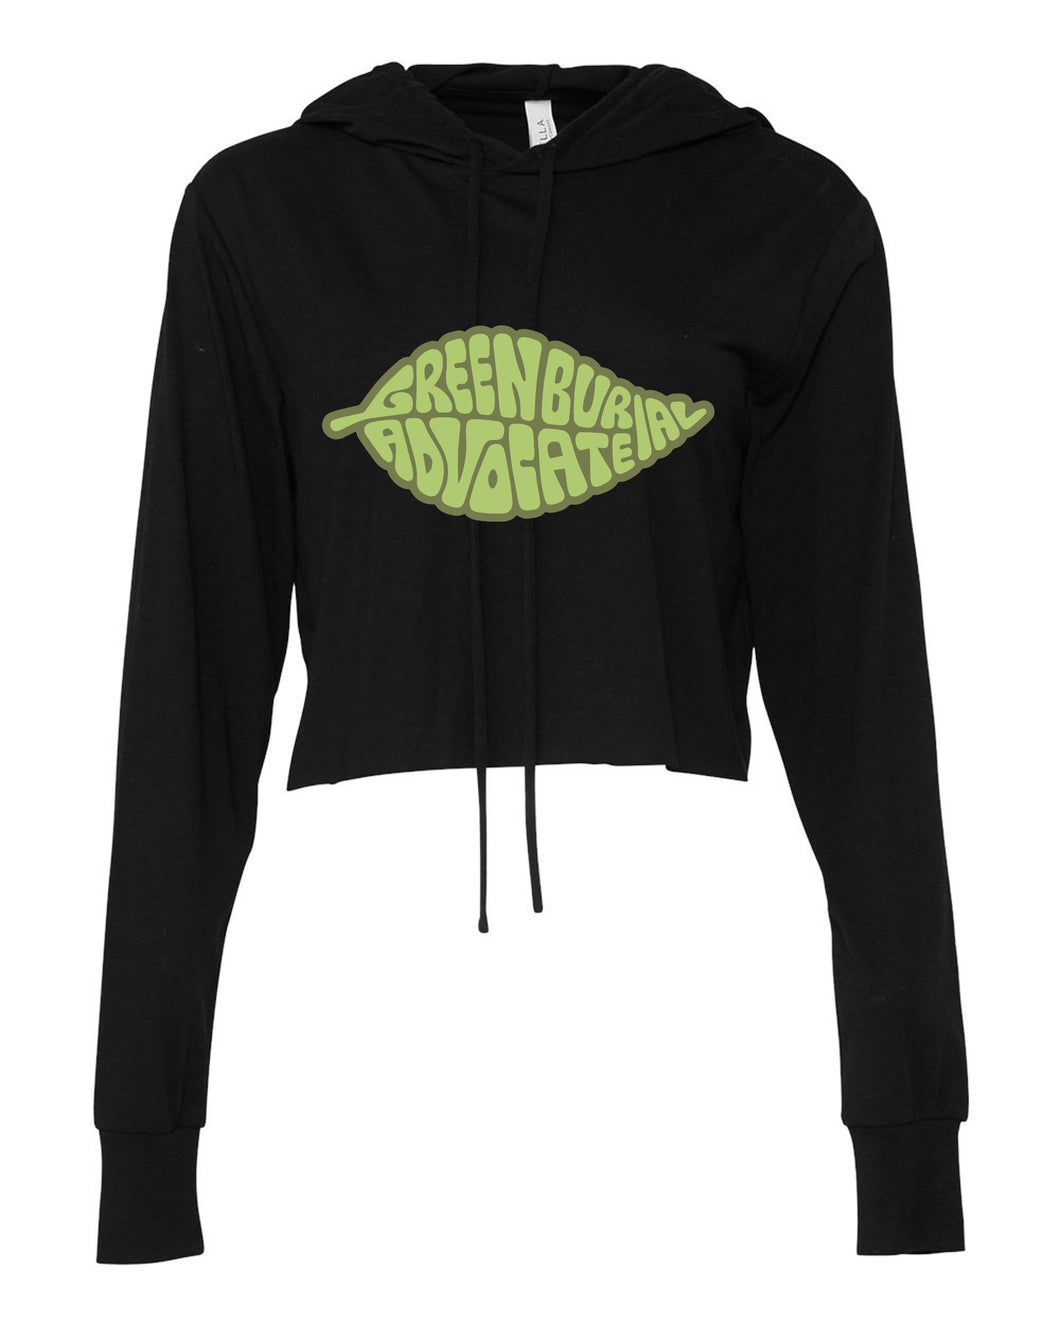 Green Burial Advocate Cropped Hoodie